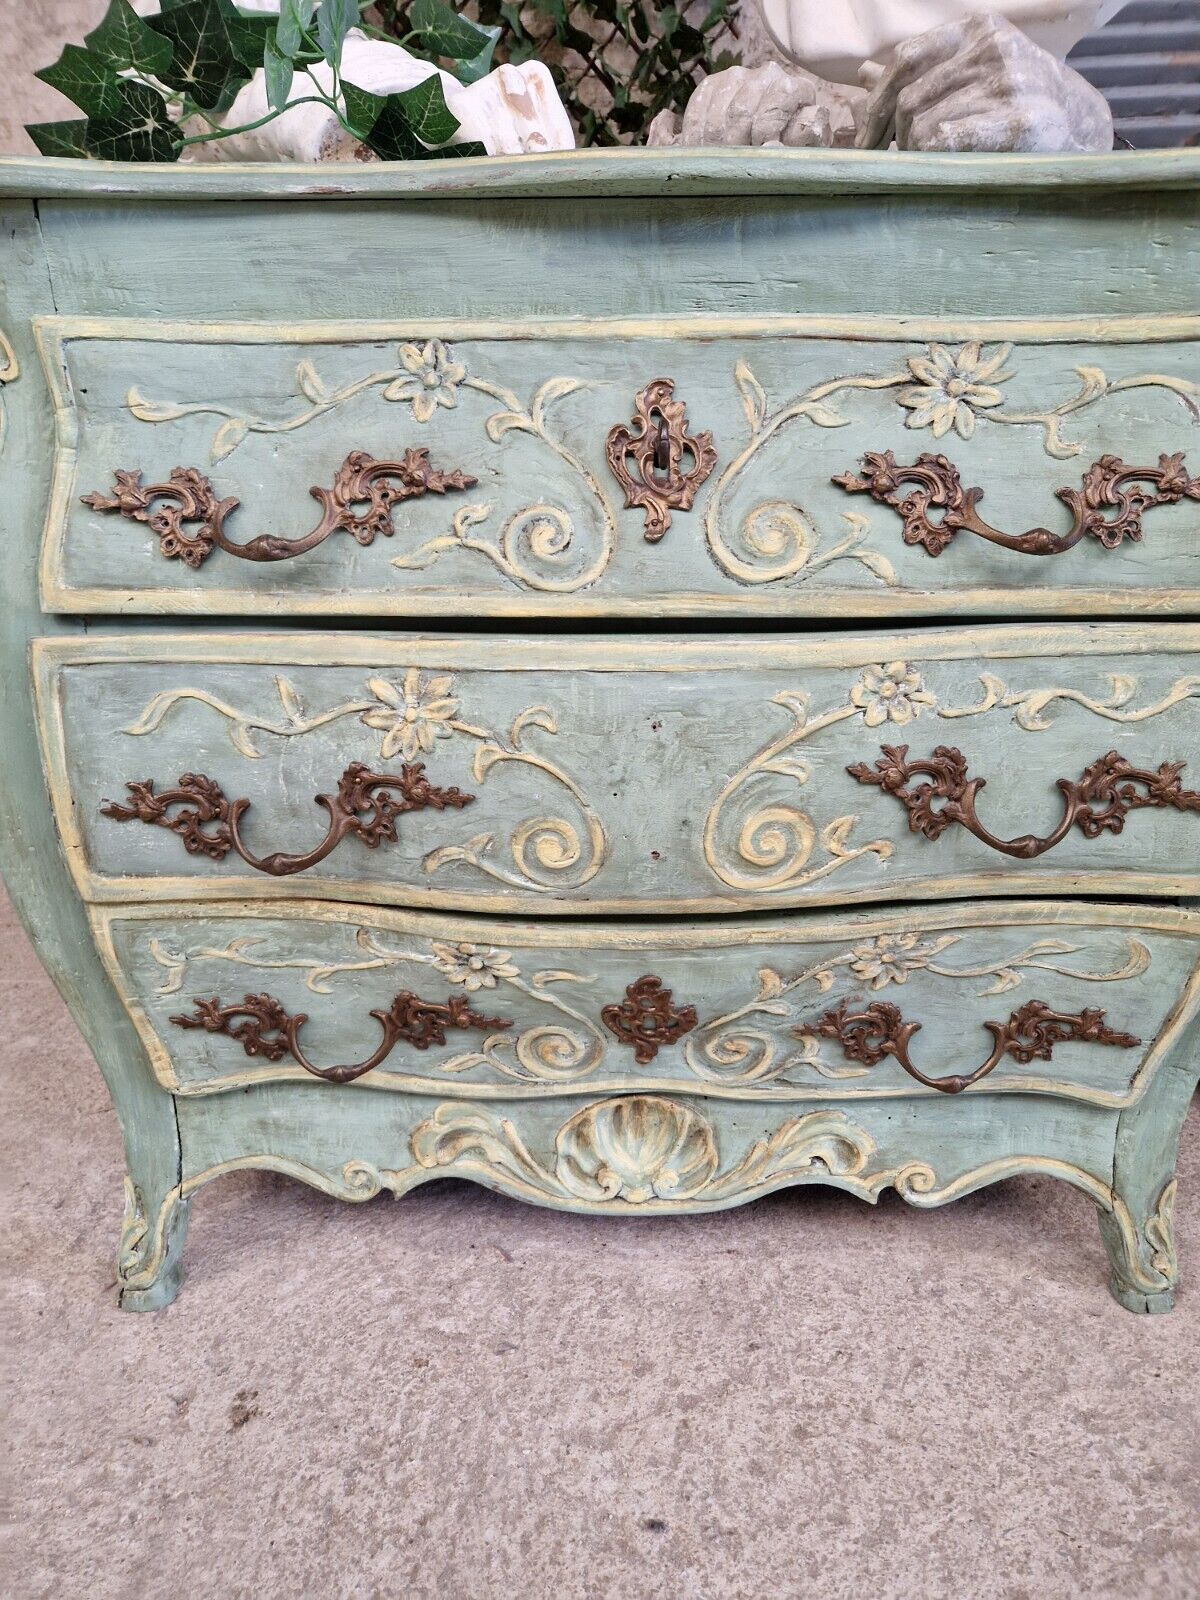 French Provincial Antique French Commode Provincial Bombe Chest of Drawers